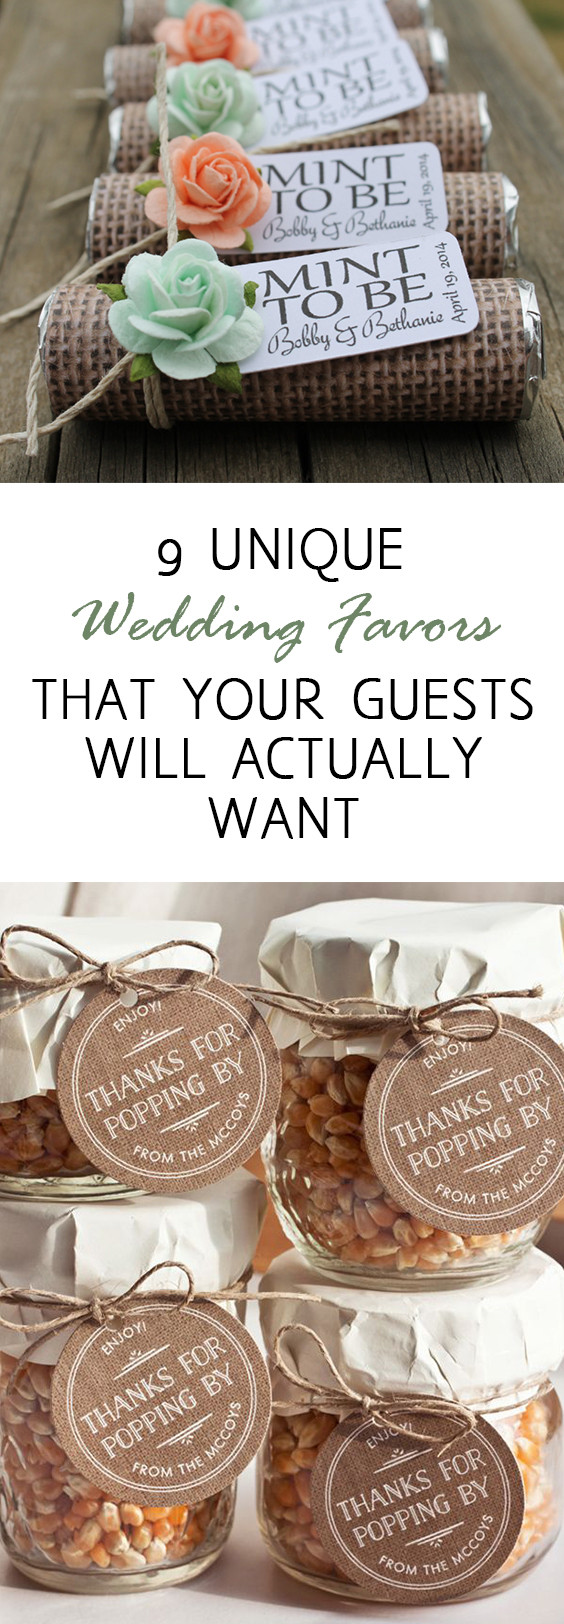 Fun Wedding Favors
 9 Unique Wedding Favors that Your Guests Will Actually